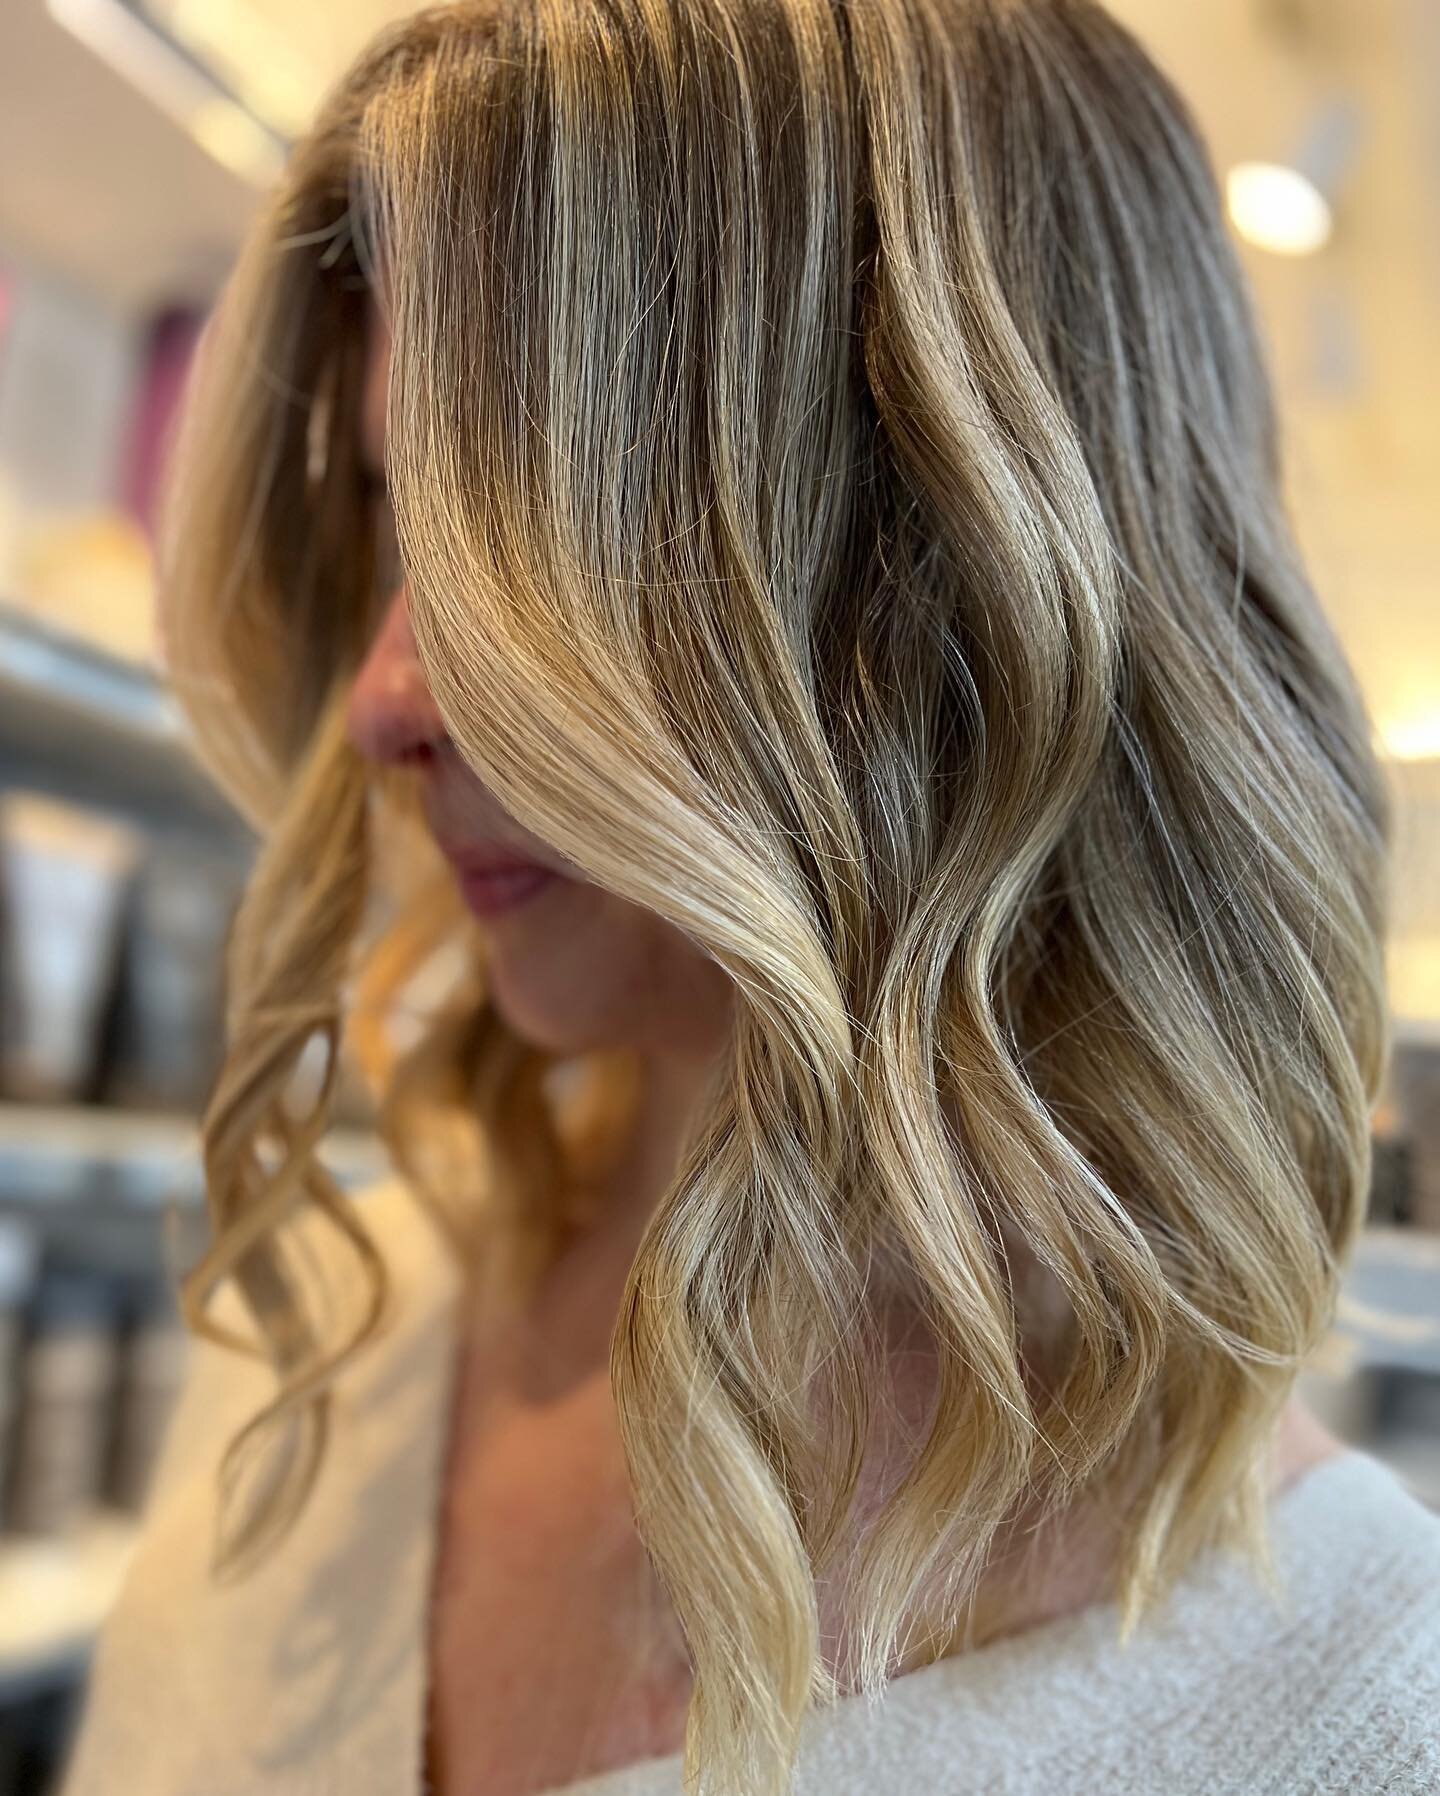 The perfect blend to glow. 🤩

✨✨✨Balayage &amp; Highlights with backcomb technique by #Juliana 

#balayage #hair #haircolor #behindthechair #haircut #hairstyle #blonde #hairstylist #blondehair #highlights #hairgoals #hairstyles #hairdresser #moderns